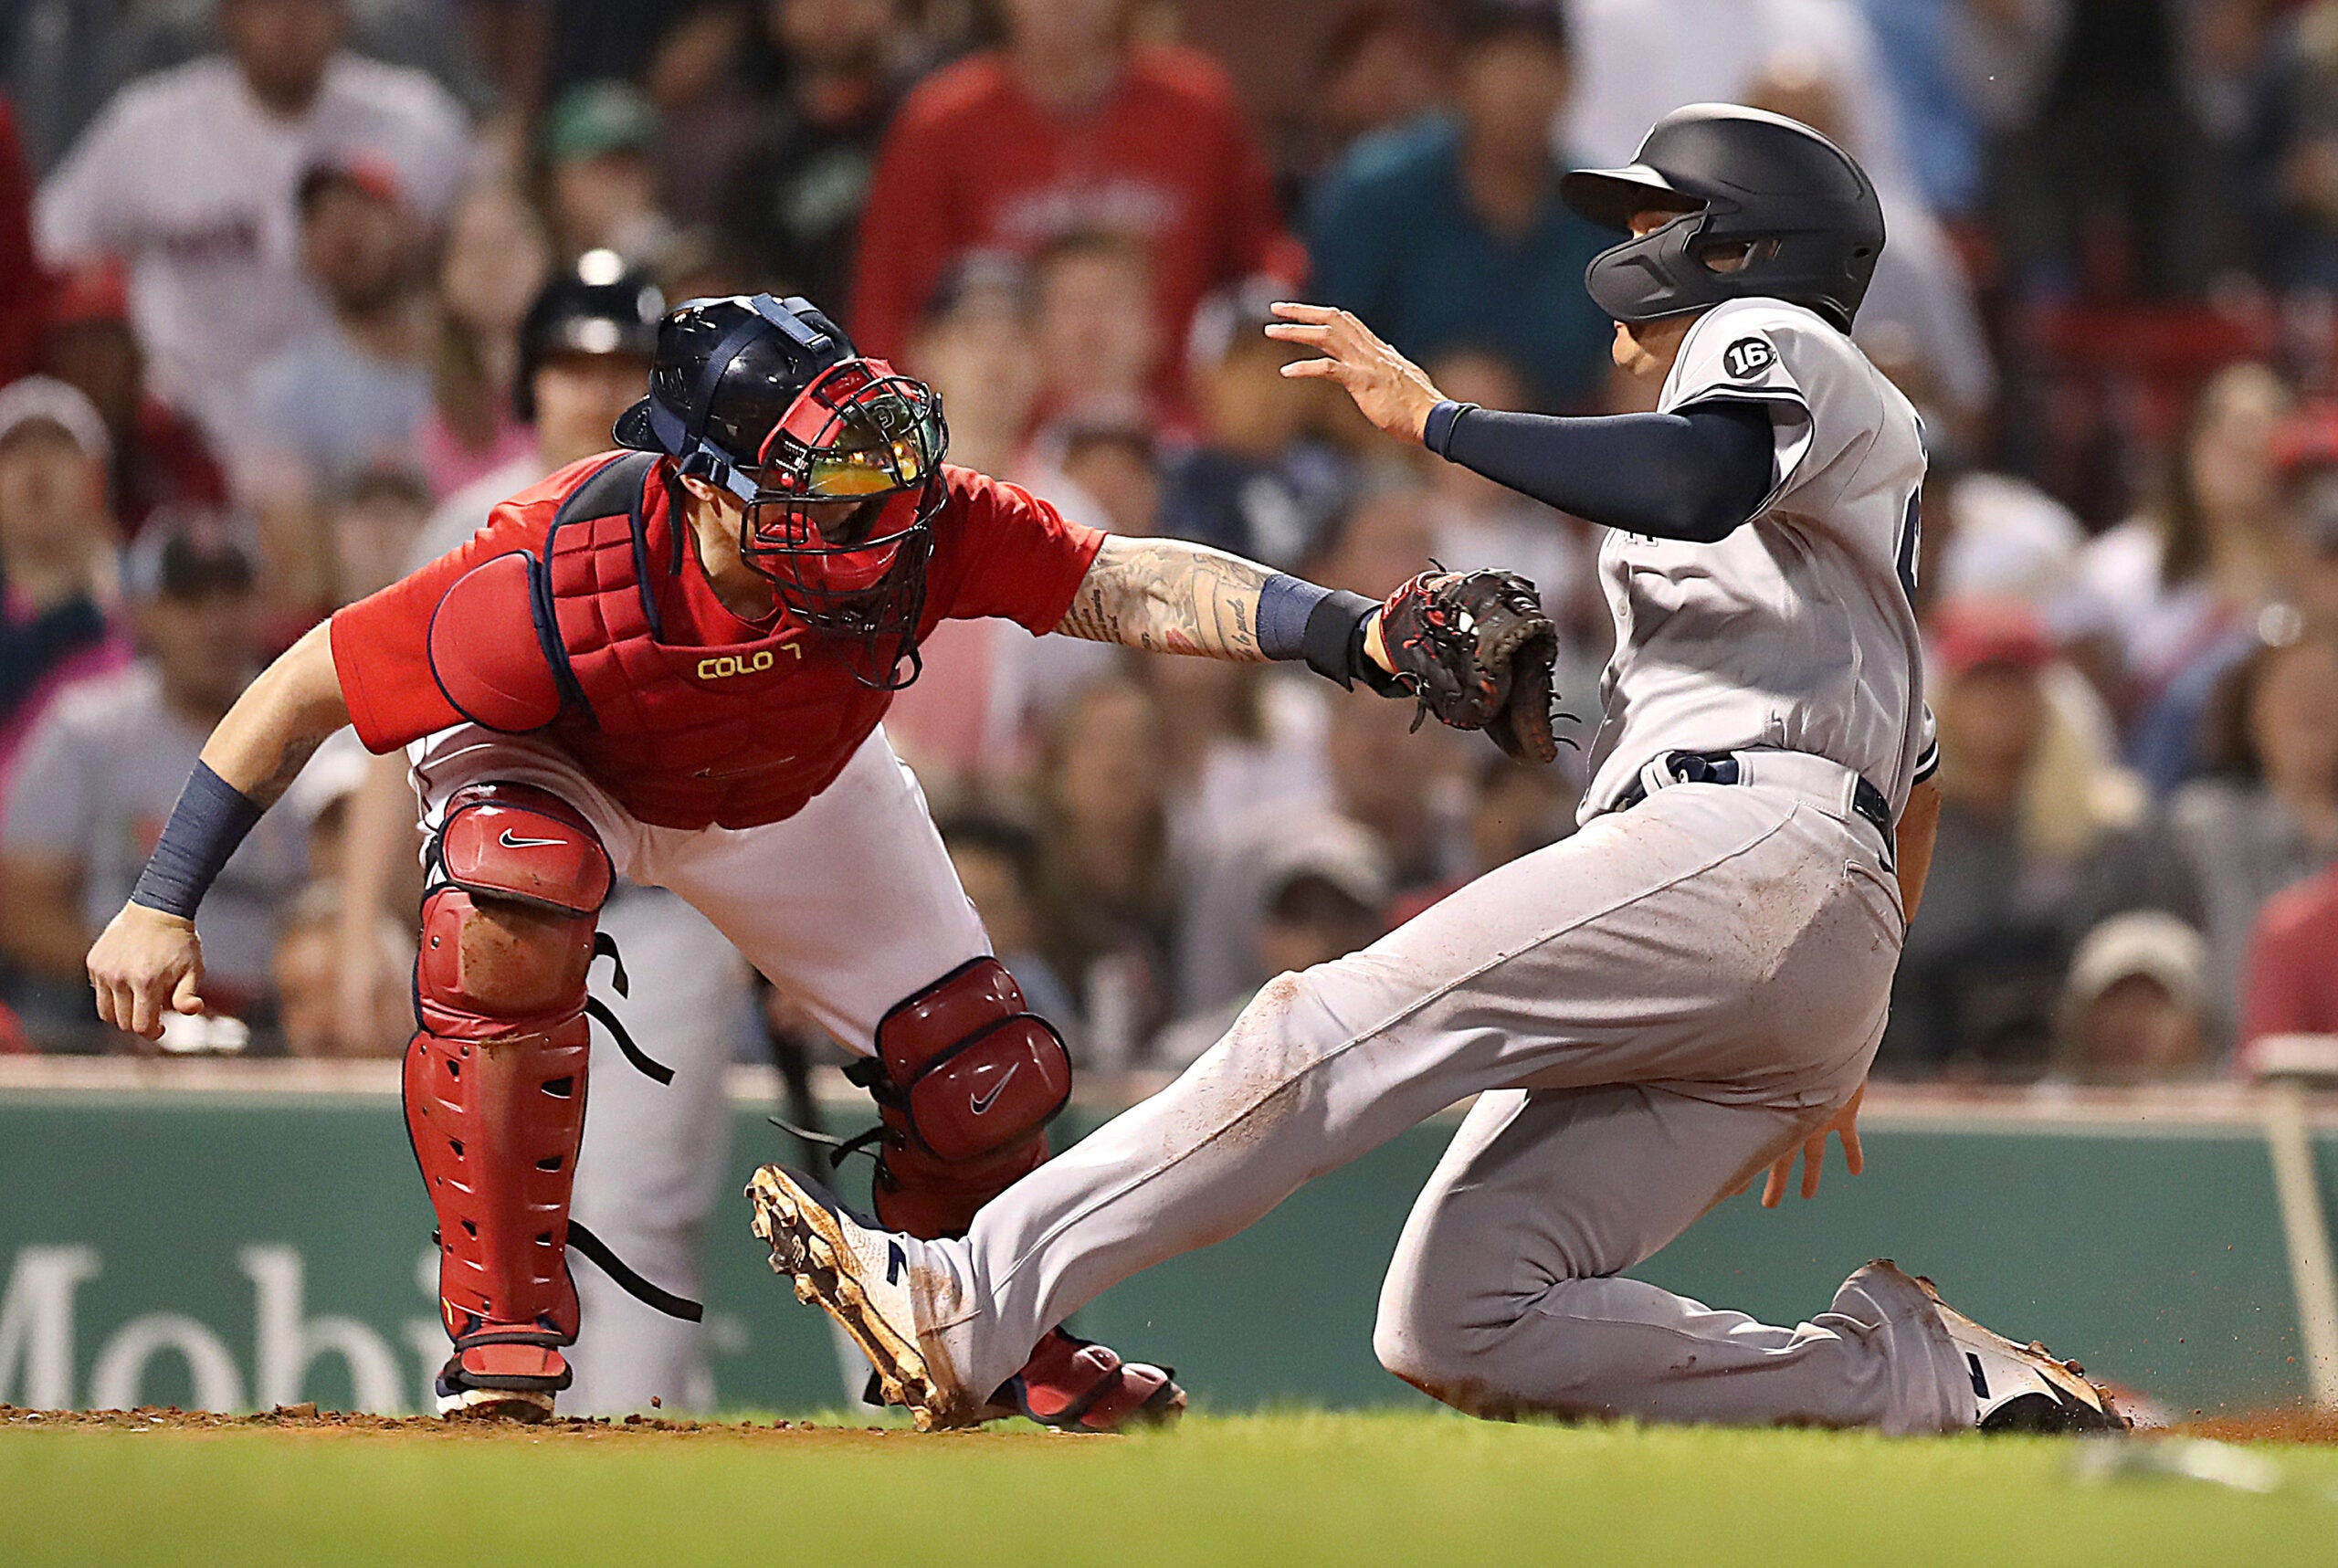 Dustin Pedroia offers Red Sox a hand at Fenway South, but makes